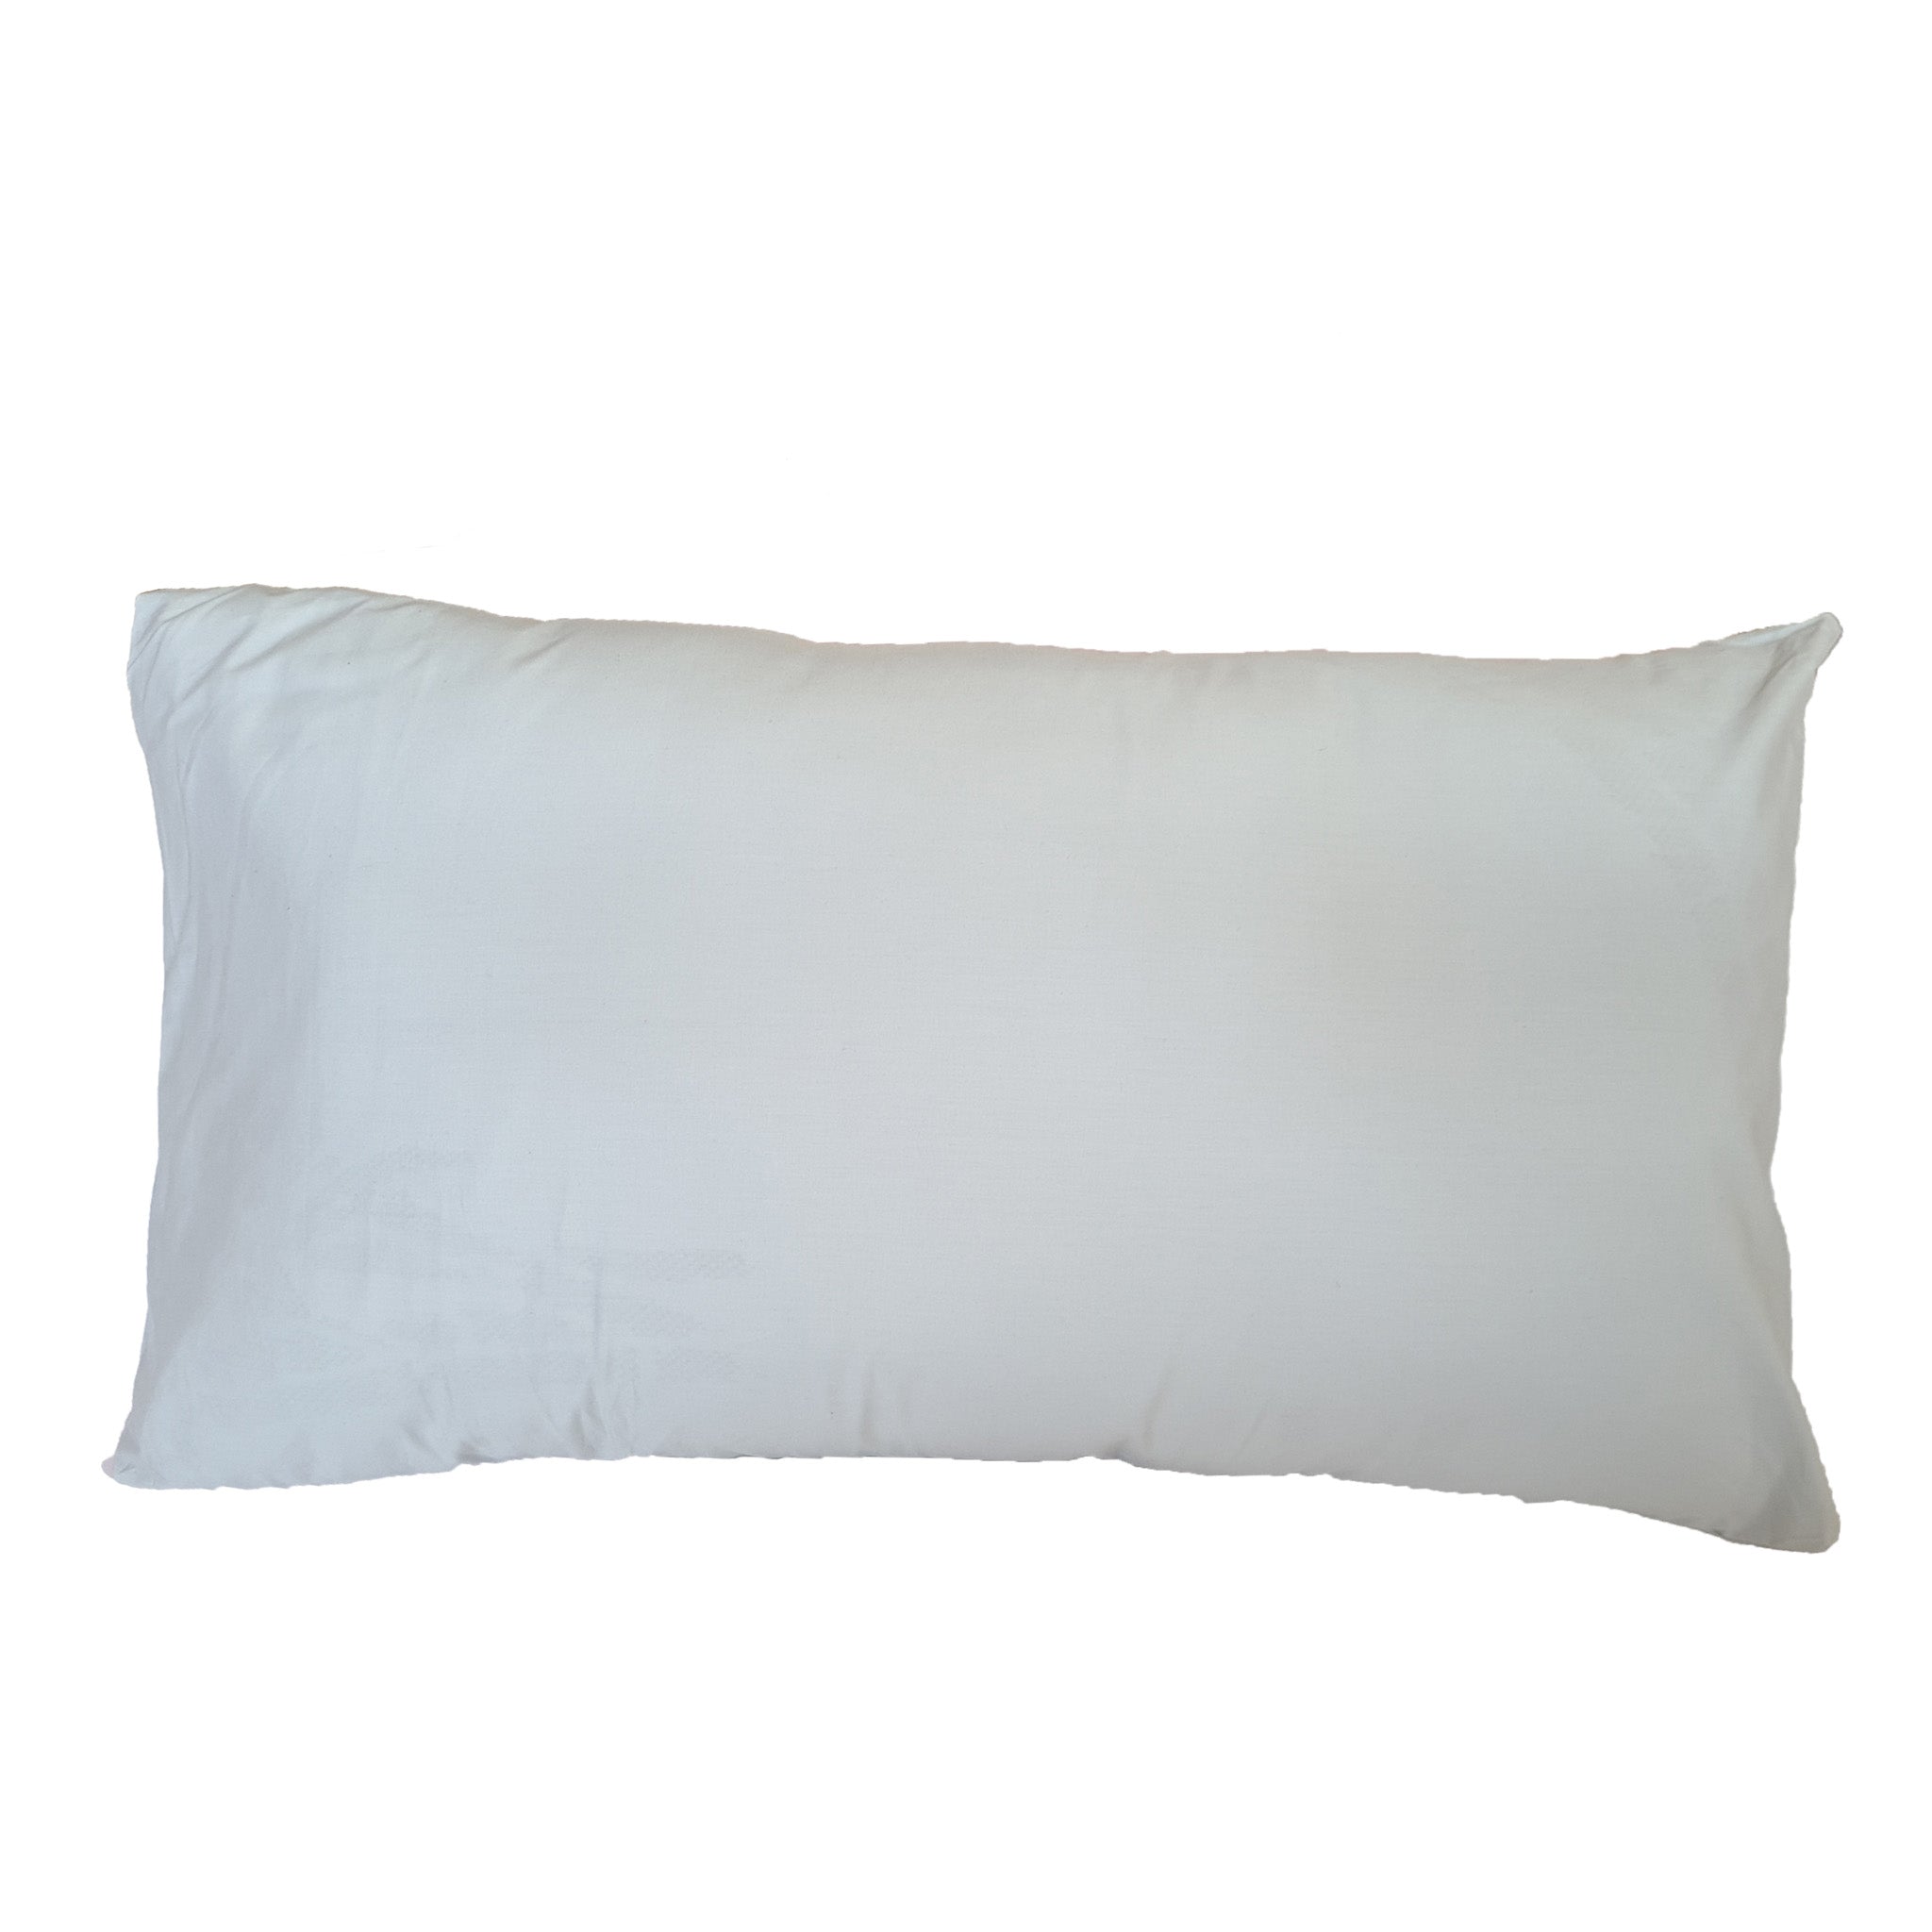 King Pillow Cases - T200 Cotton Percale